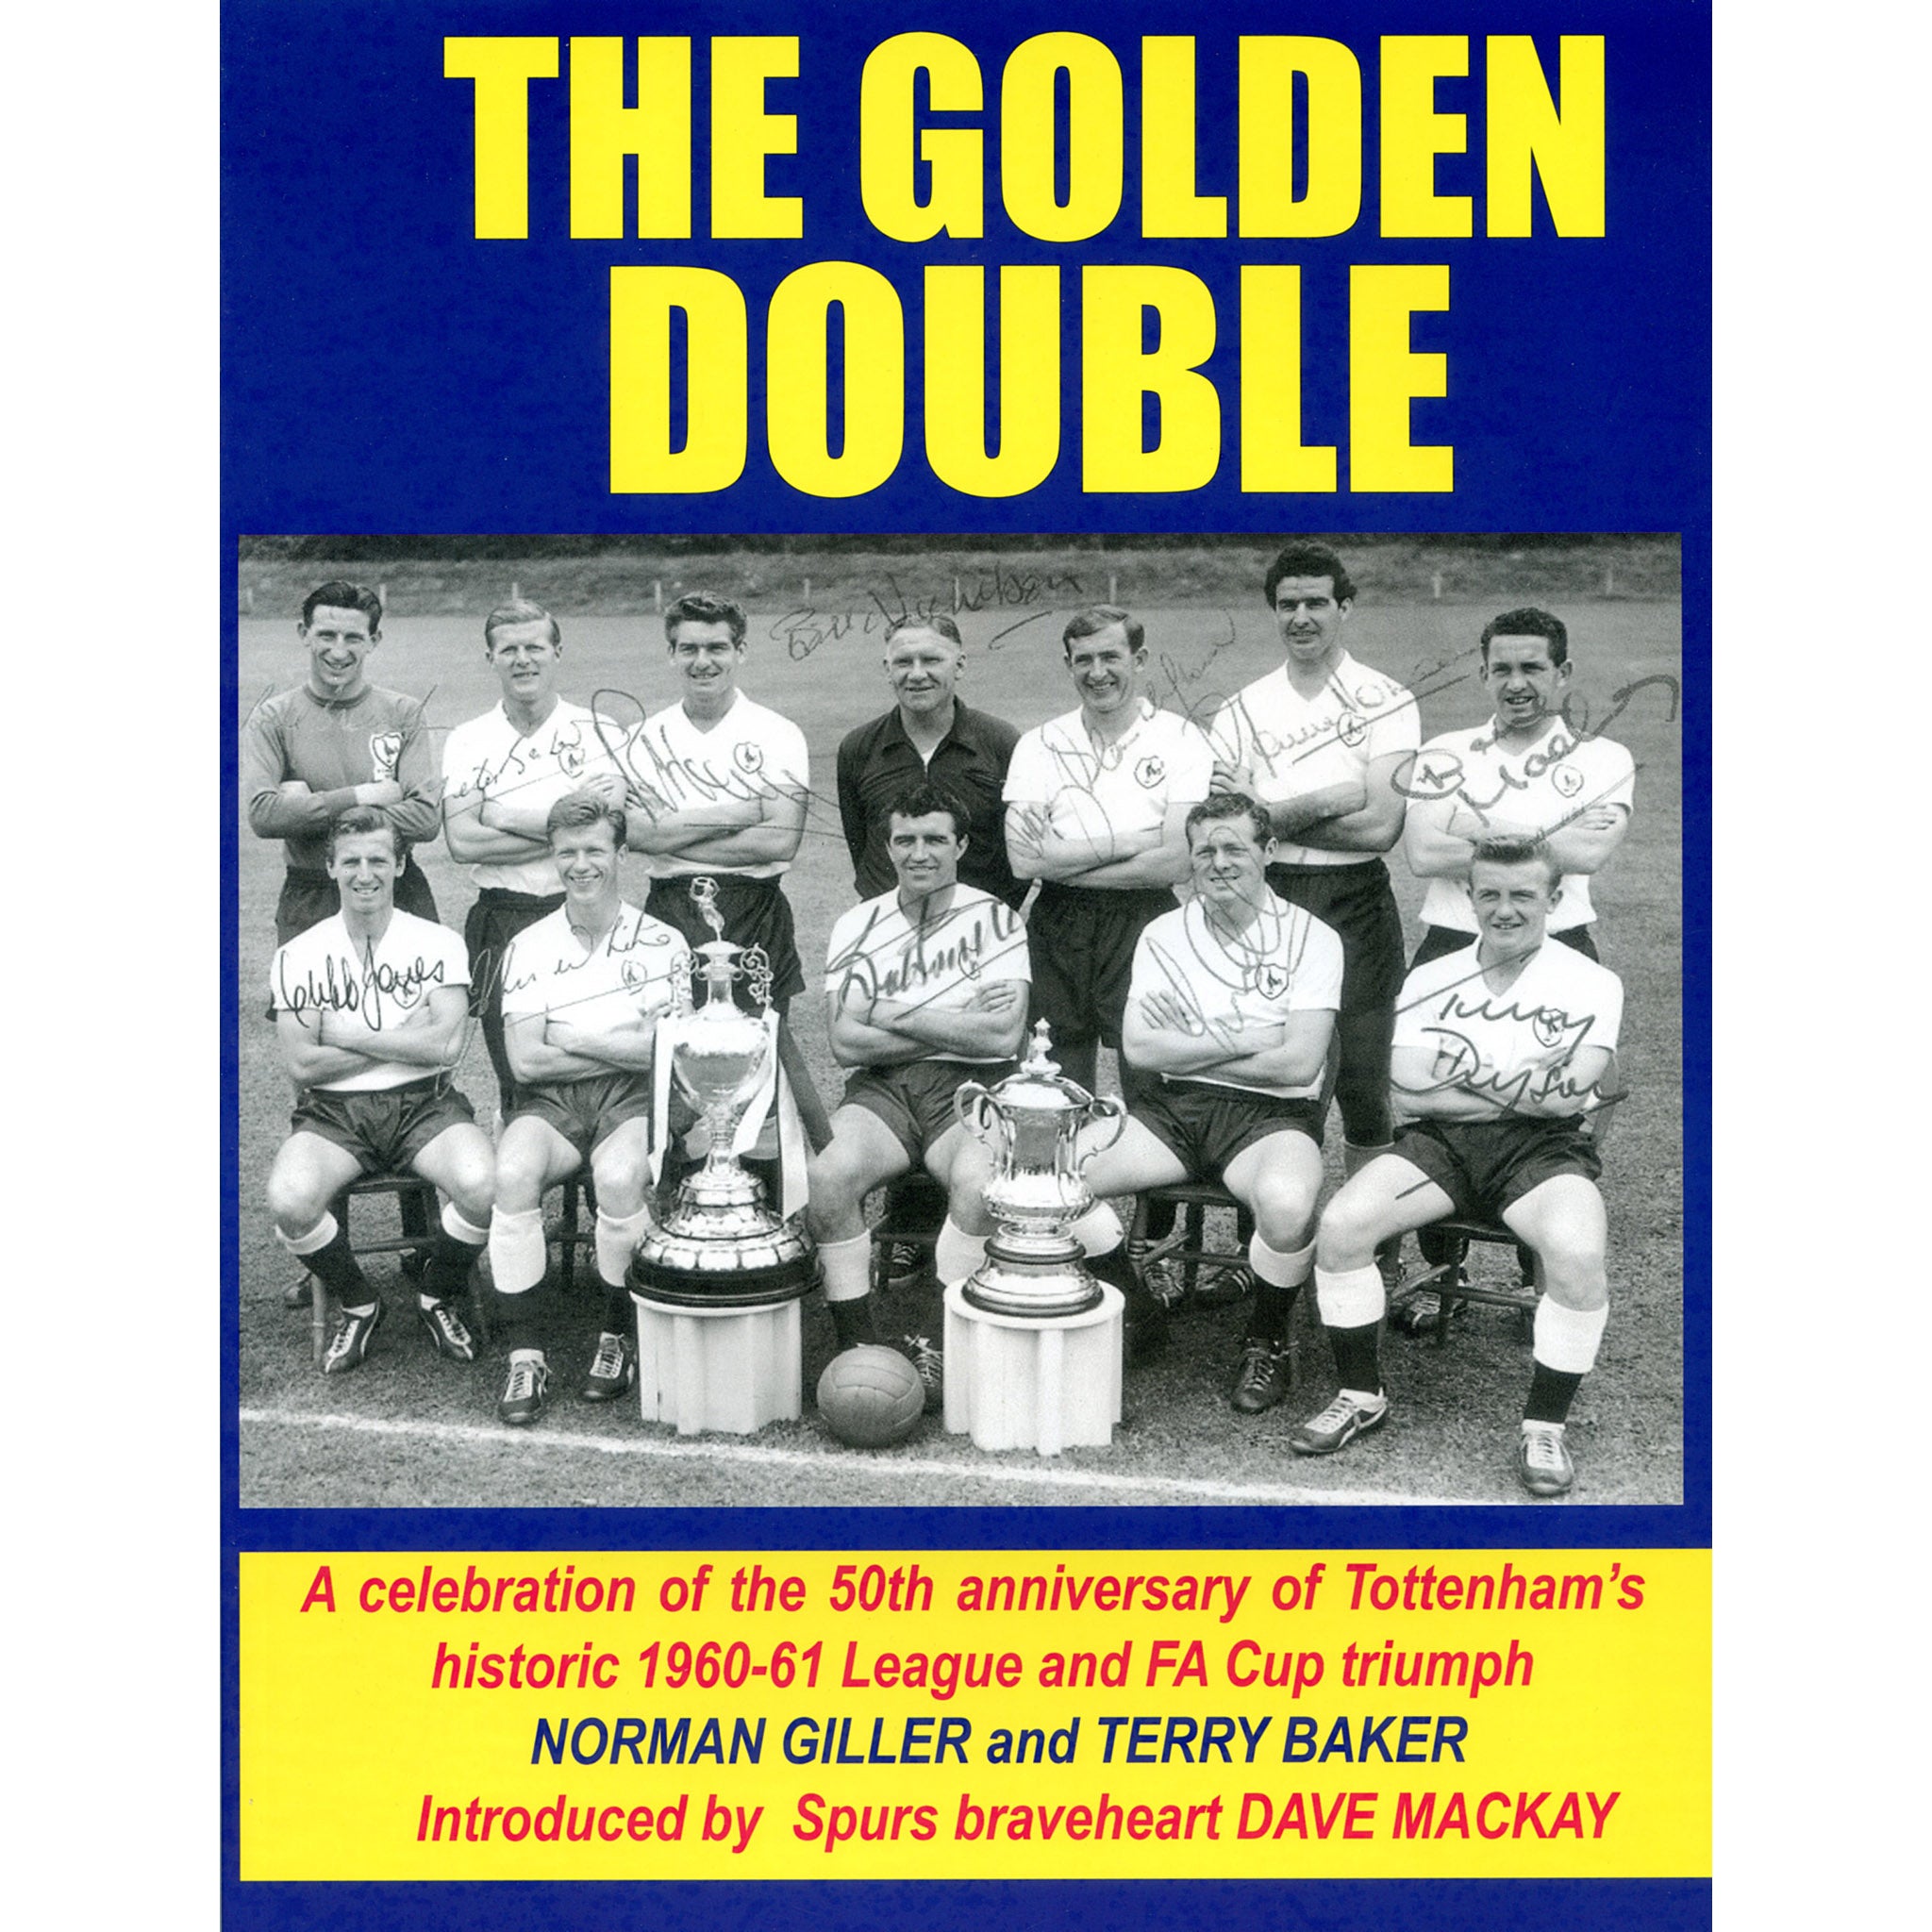 The Golden Double – A celebration of Tottenham's historic 1960-61 League and F.A. Cup triumph